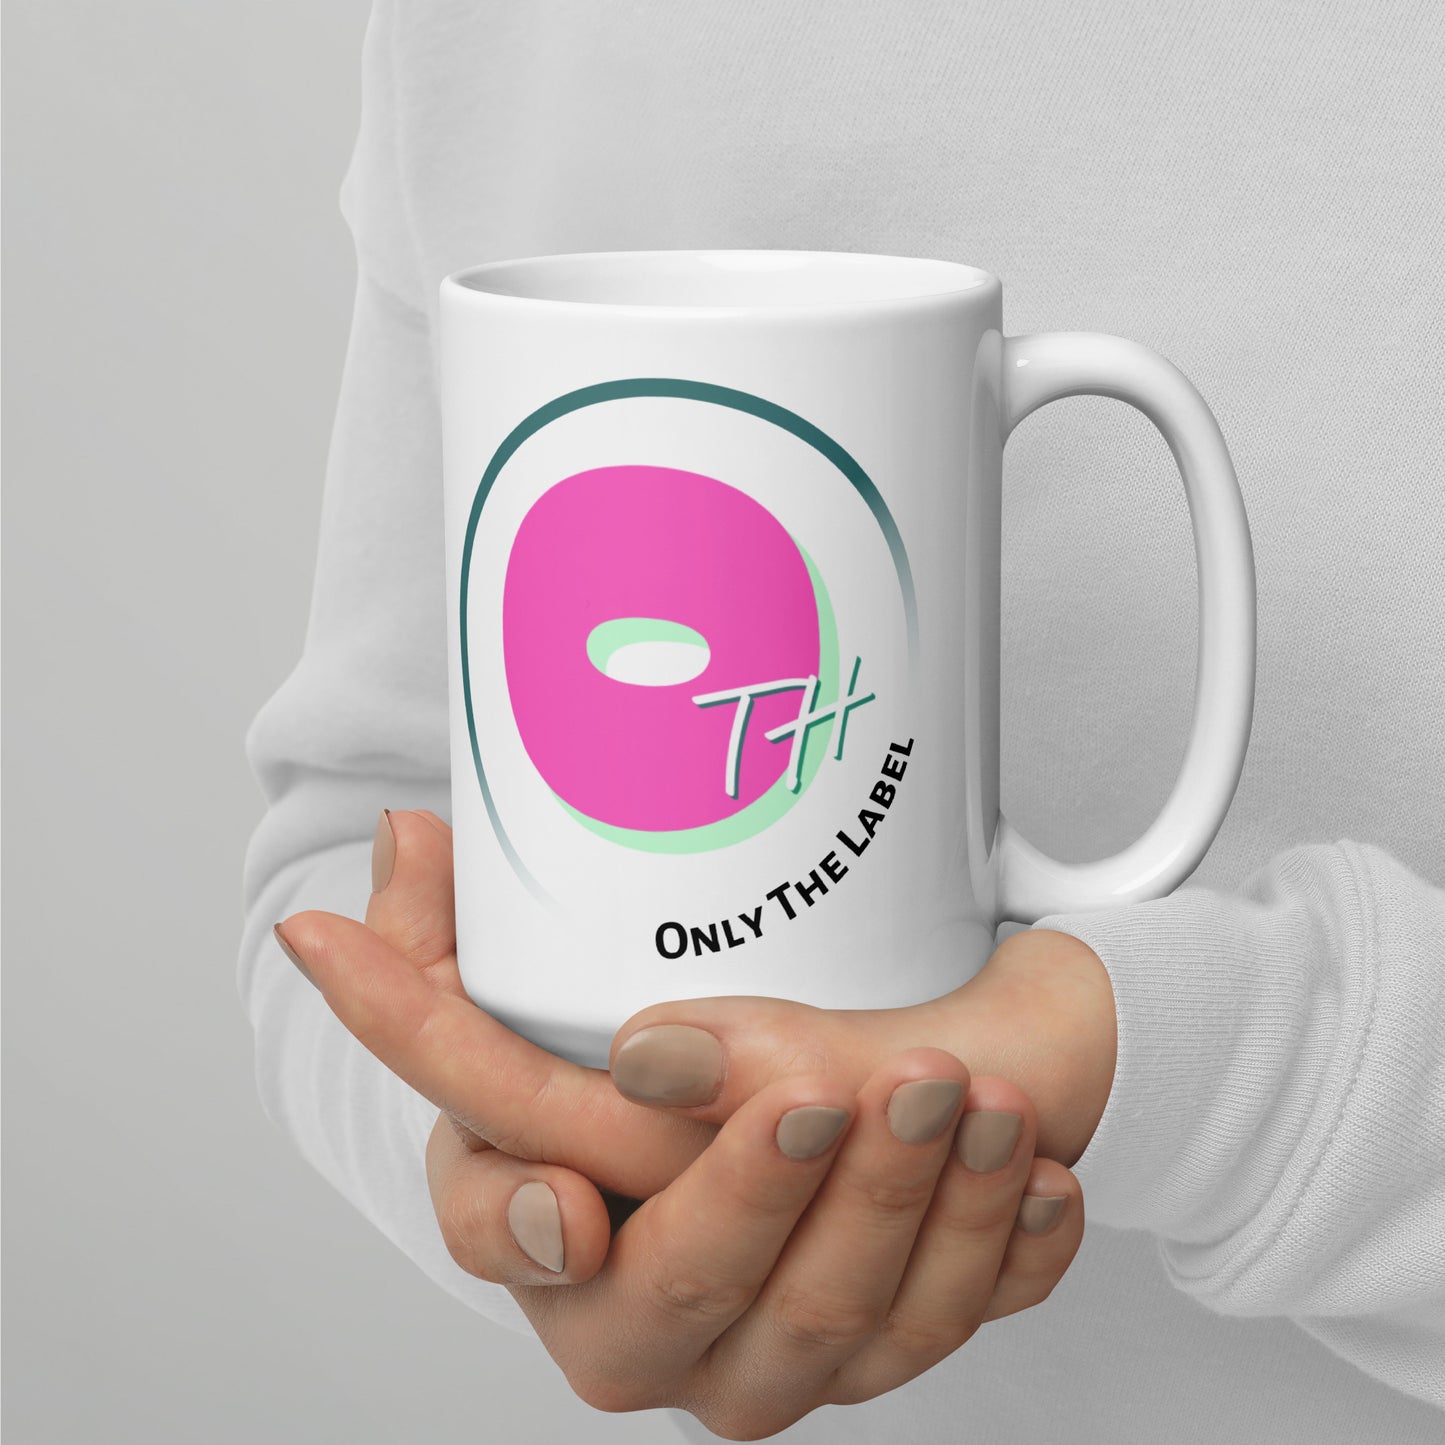 Only The Label White Glossy Mug